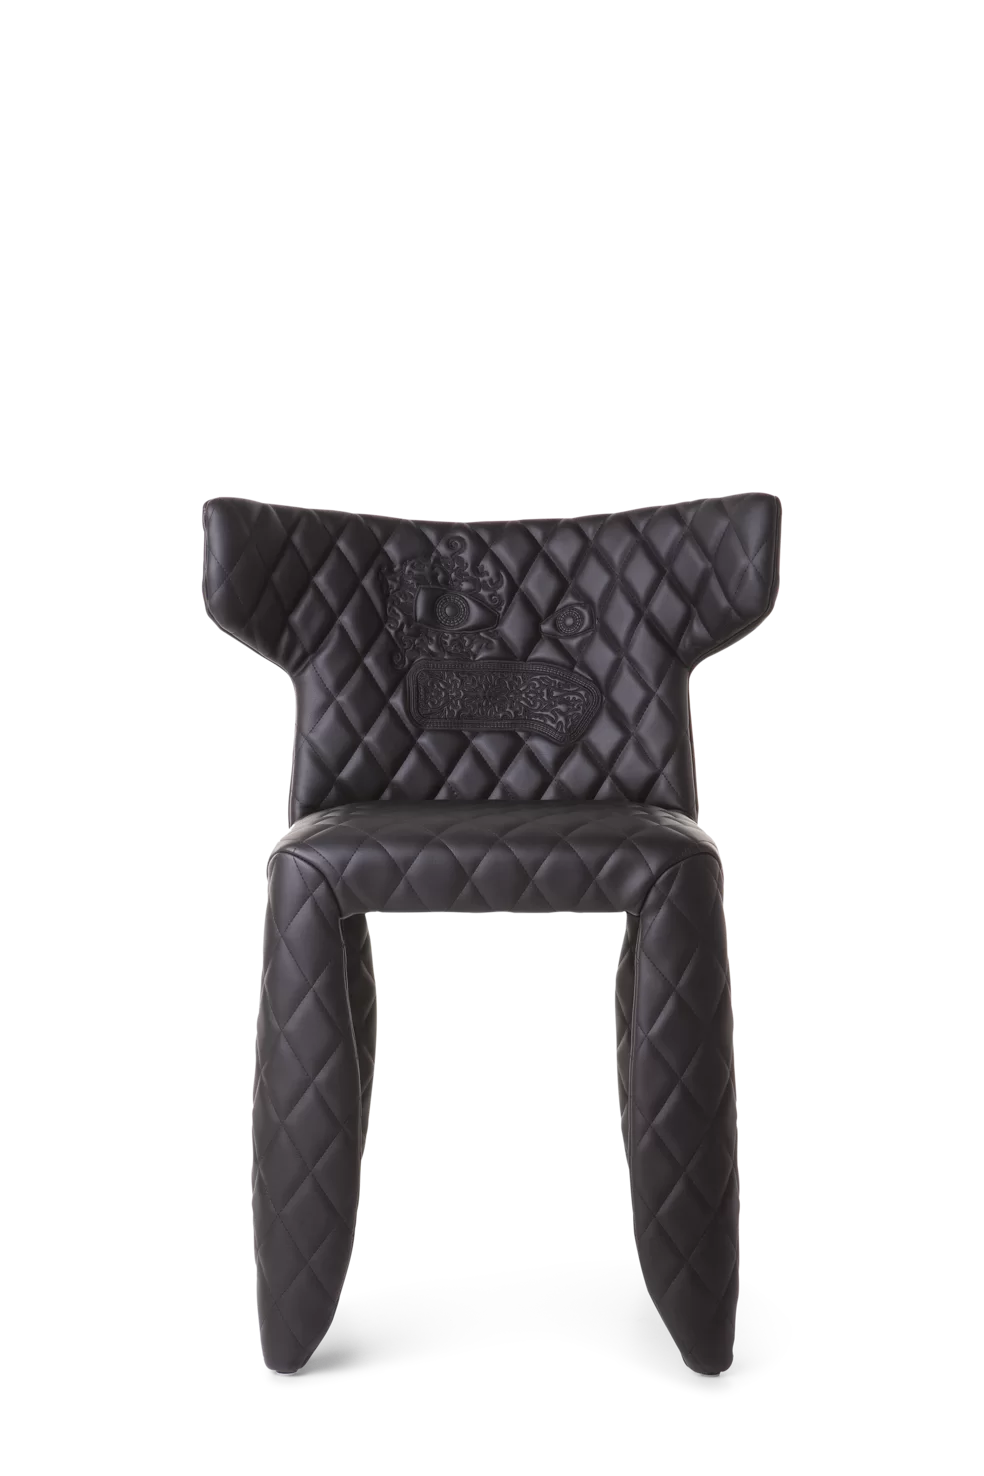 Monster Chair black face and arms front side